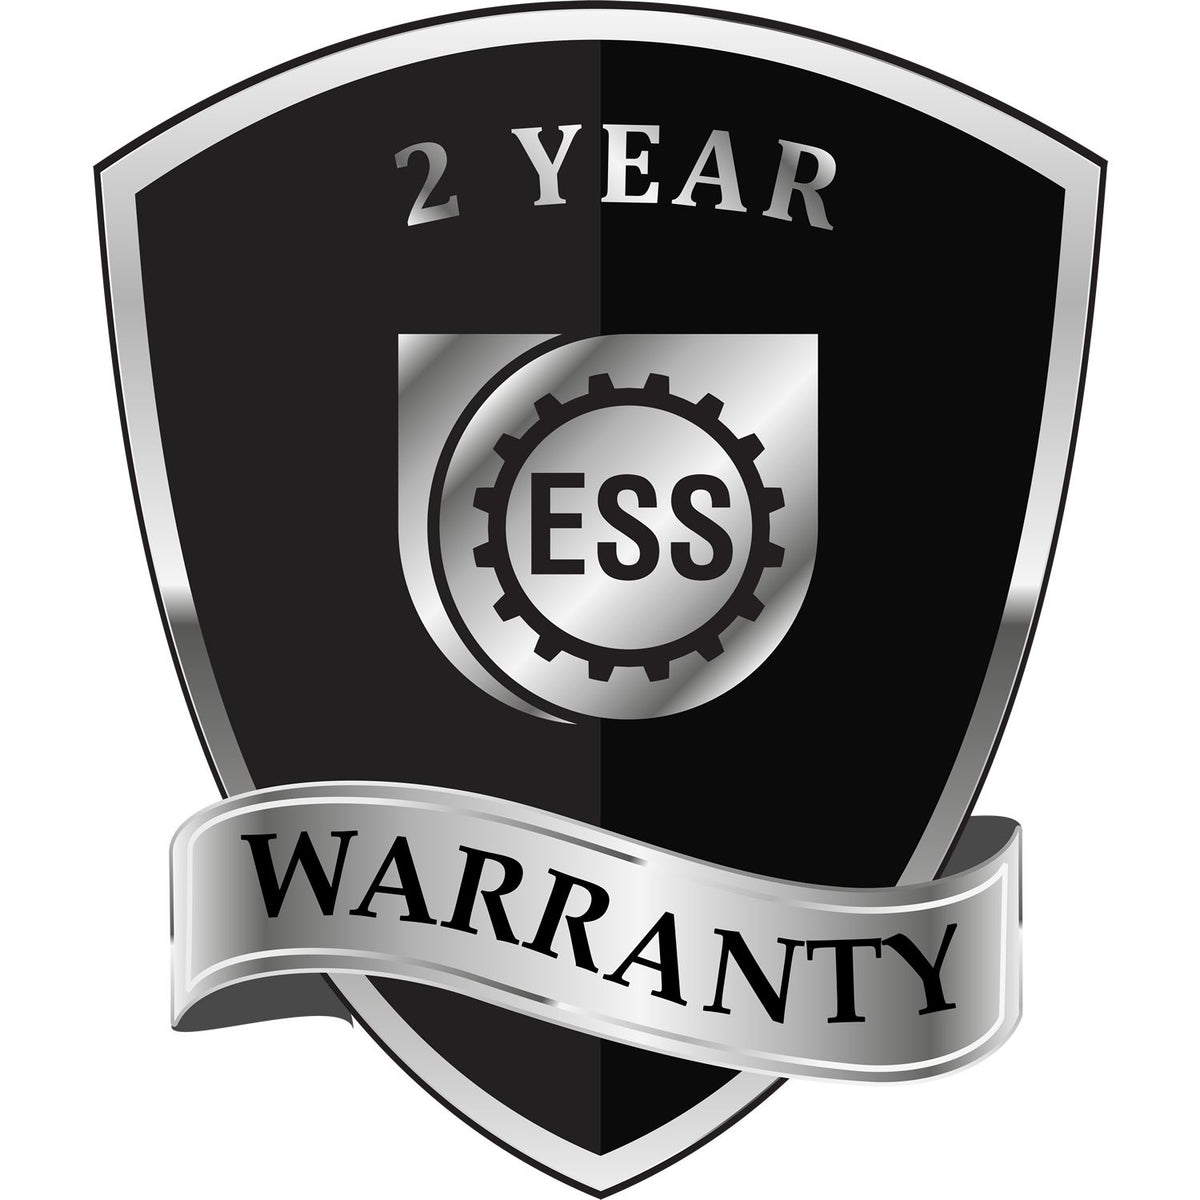 A badge or emblem showing a warranty icon for the Long Reach Virginia PE Seal